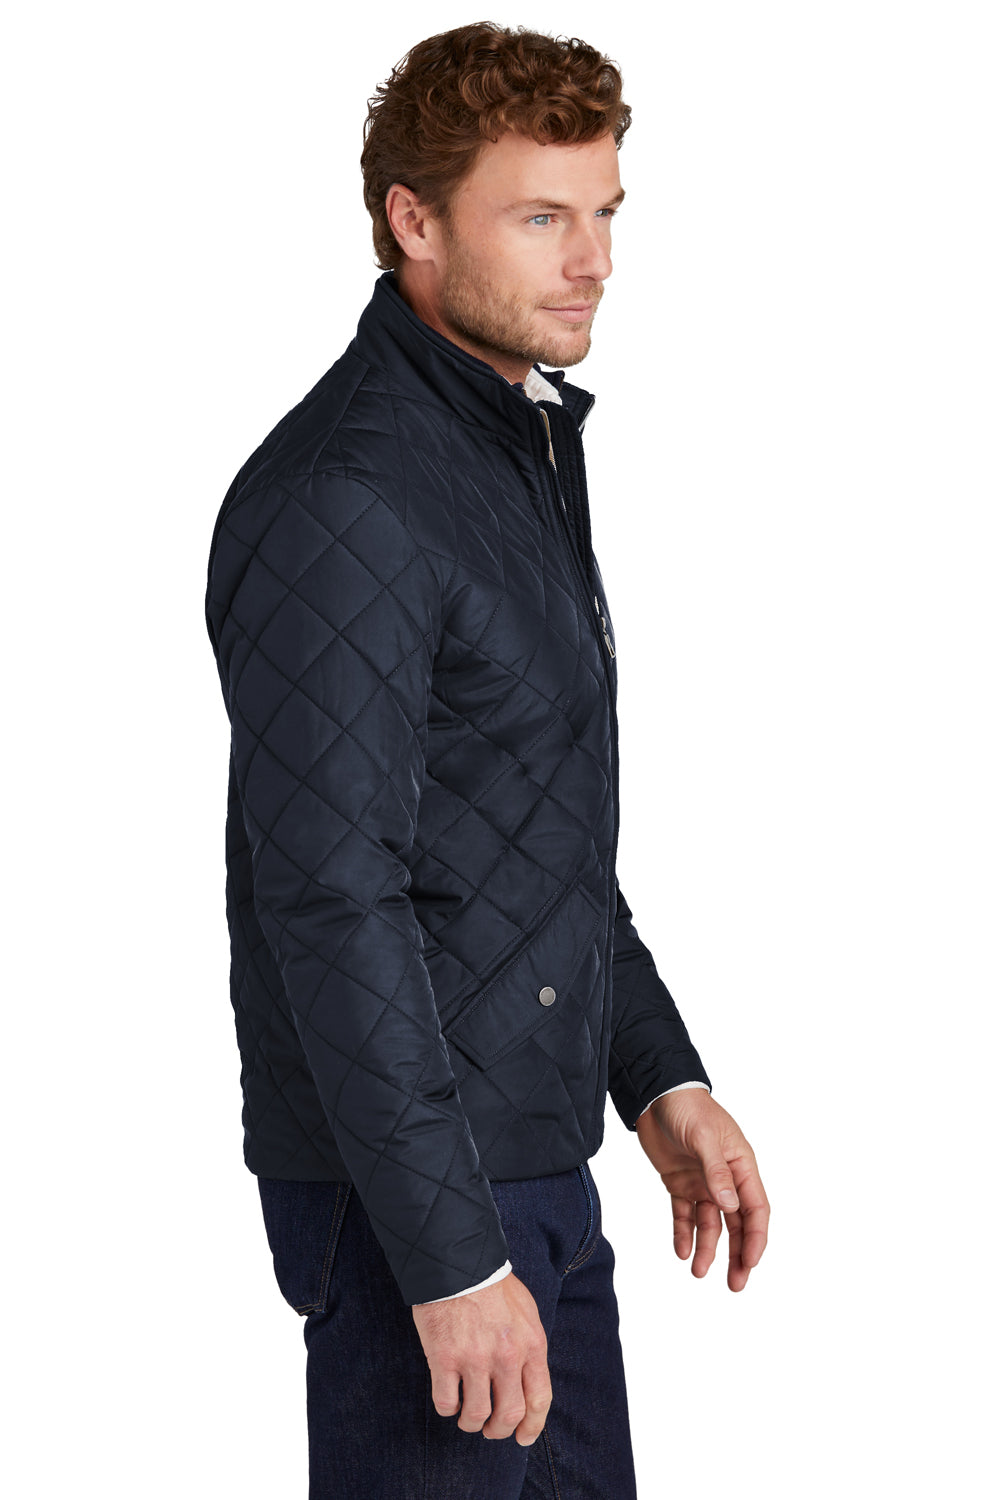 Brooks Brothers Mens Water Resistant Quilted Full Zip Jacket Night Navy Blue Model Side